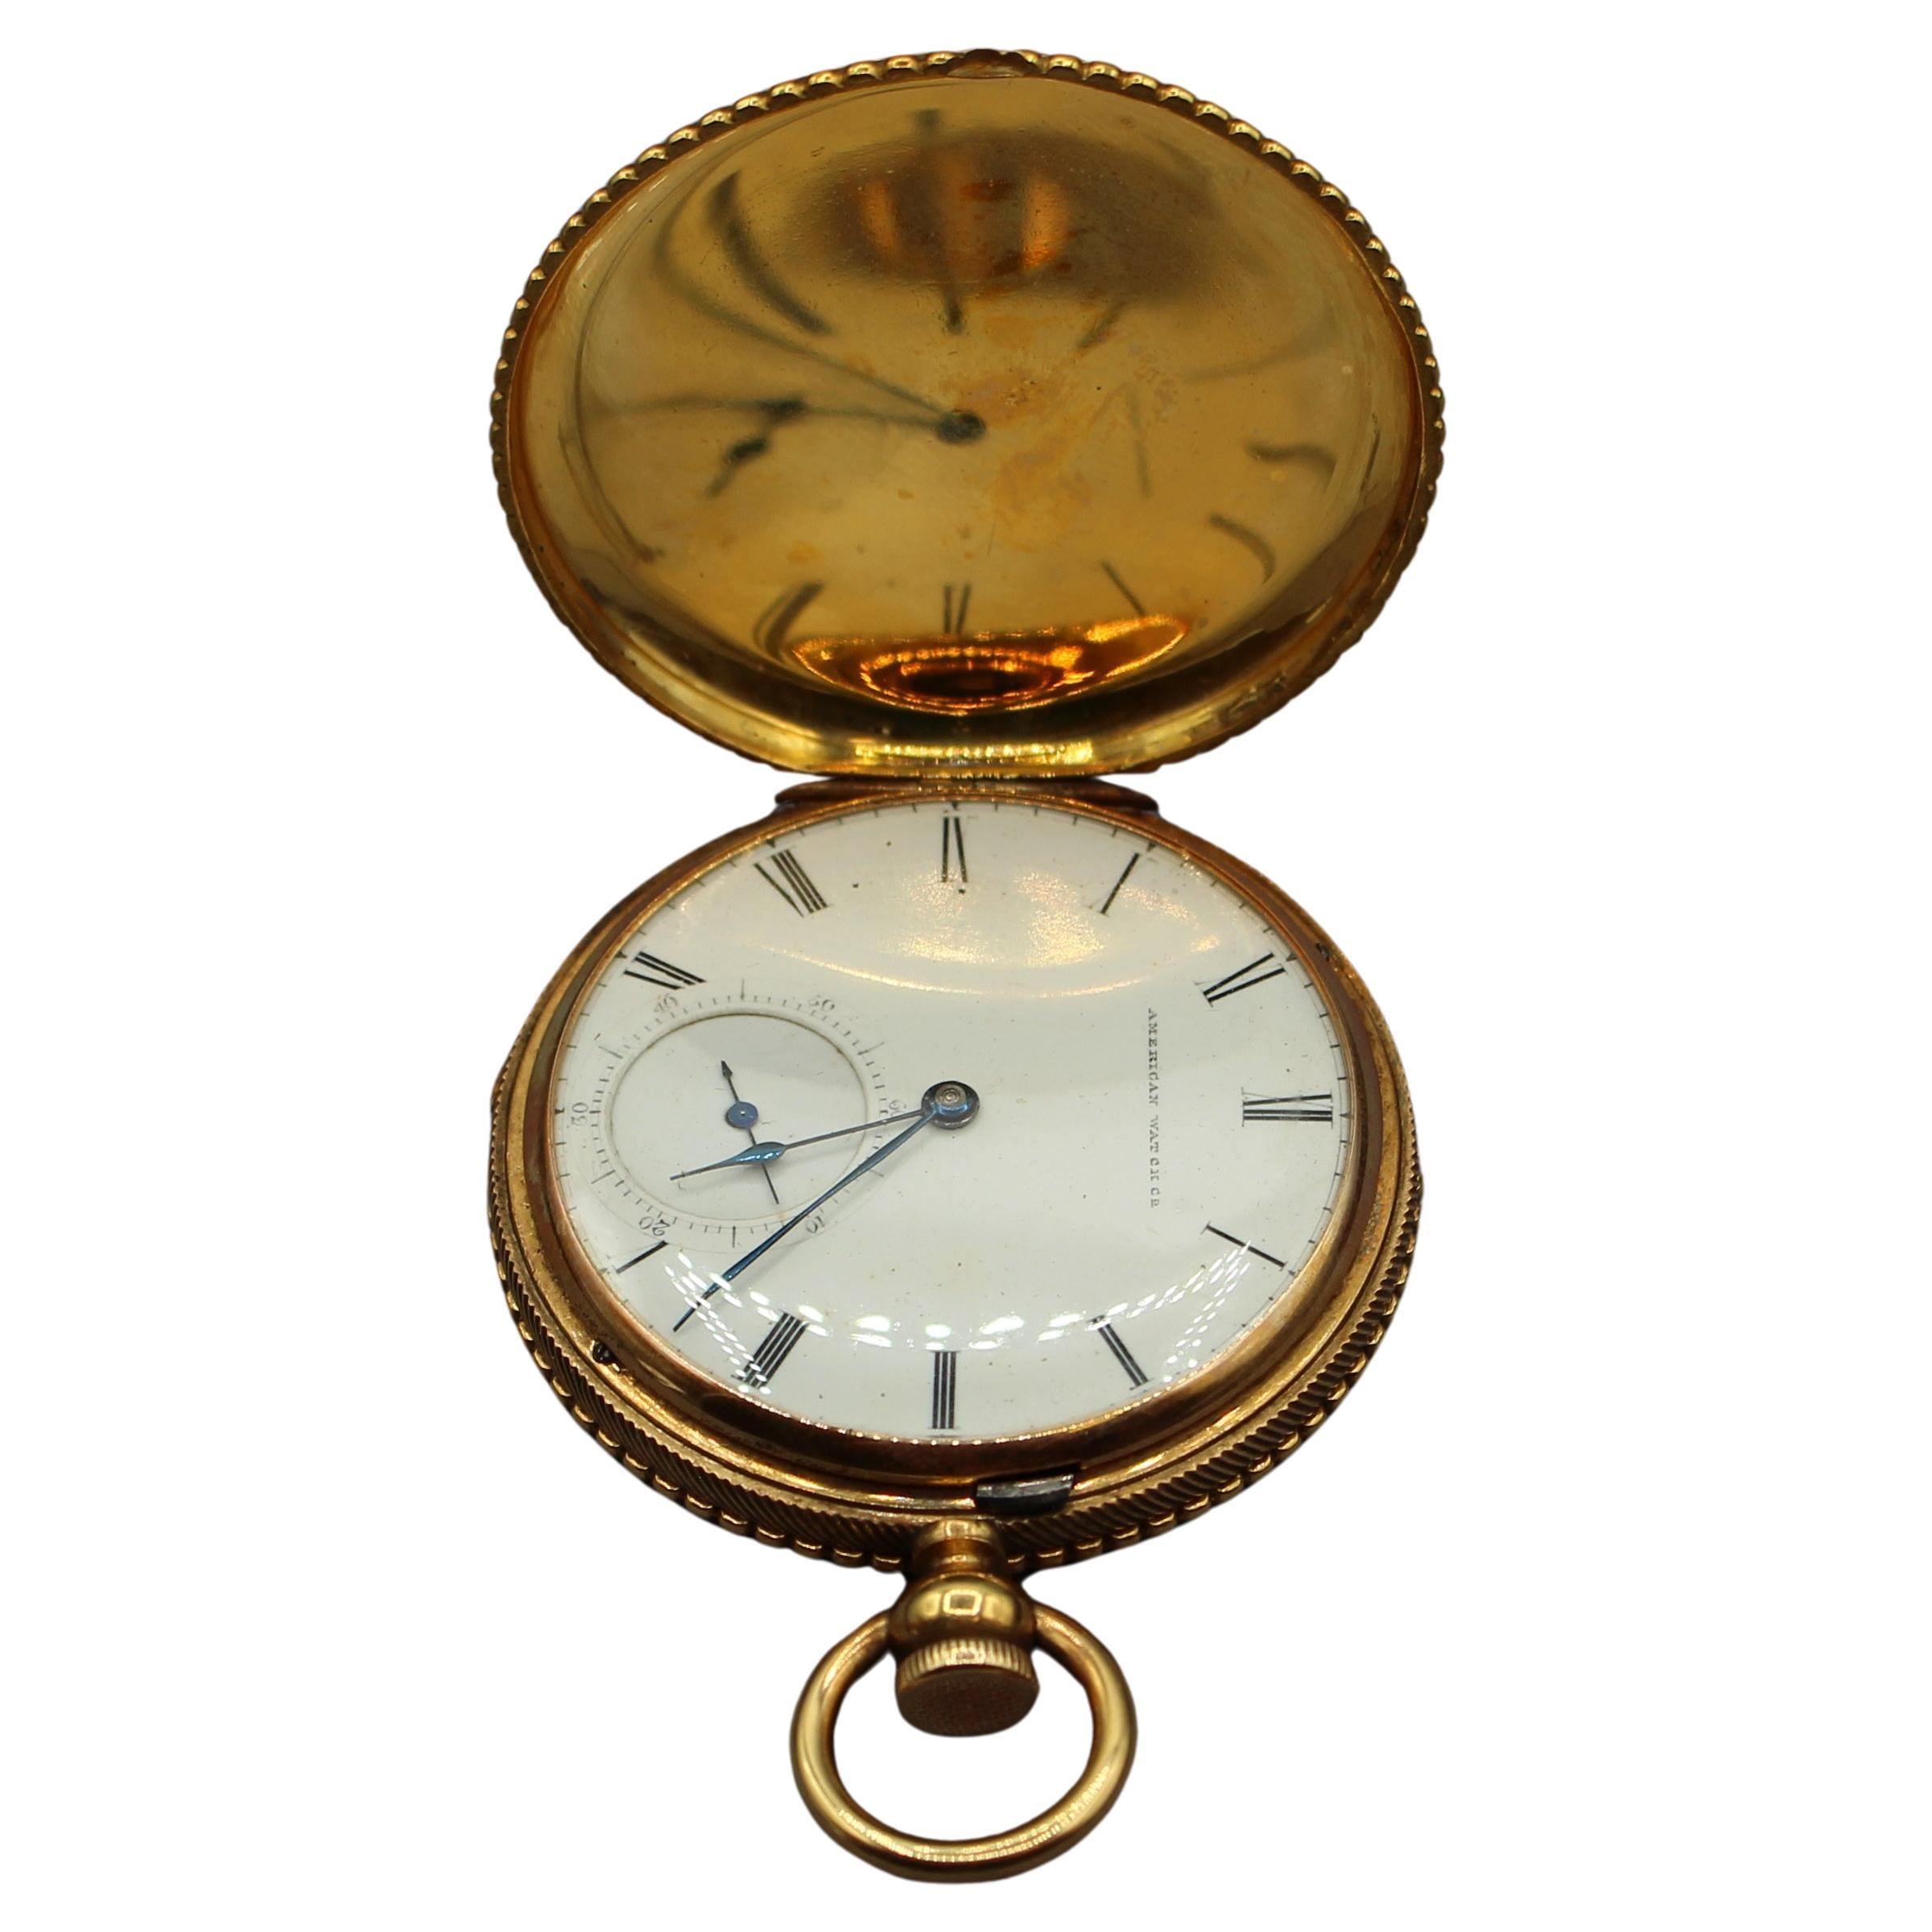 1891 Gold Pocket Watch by American Watch Co.